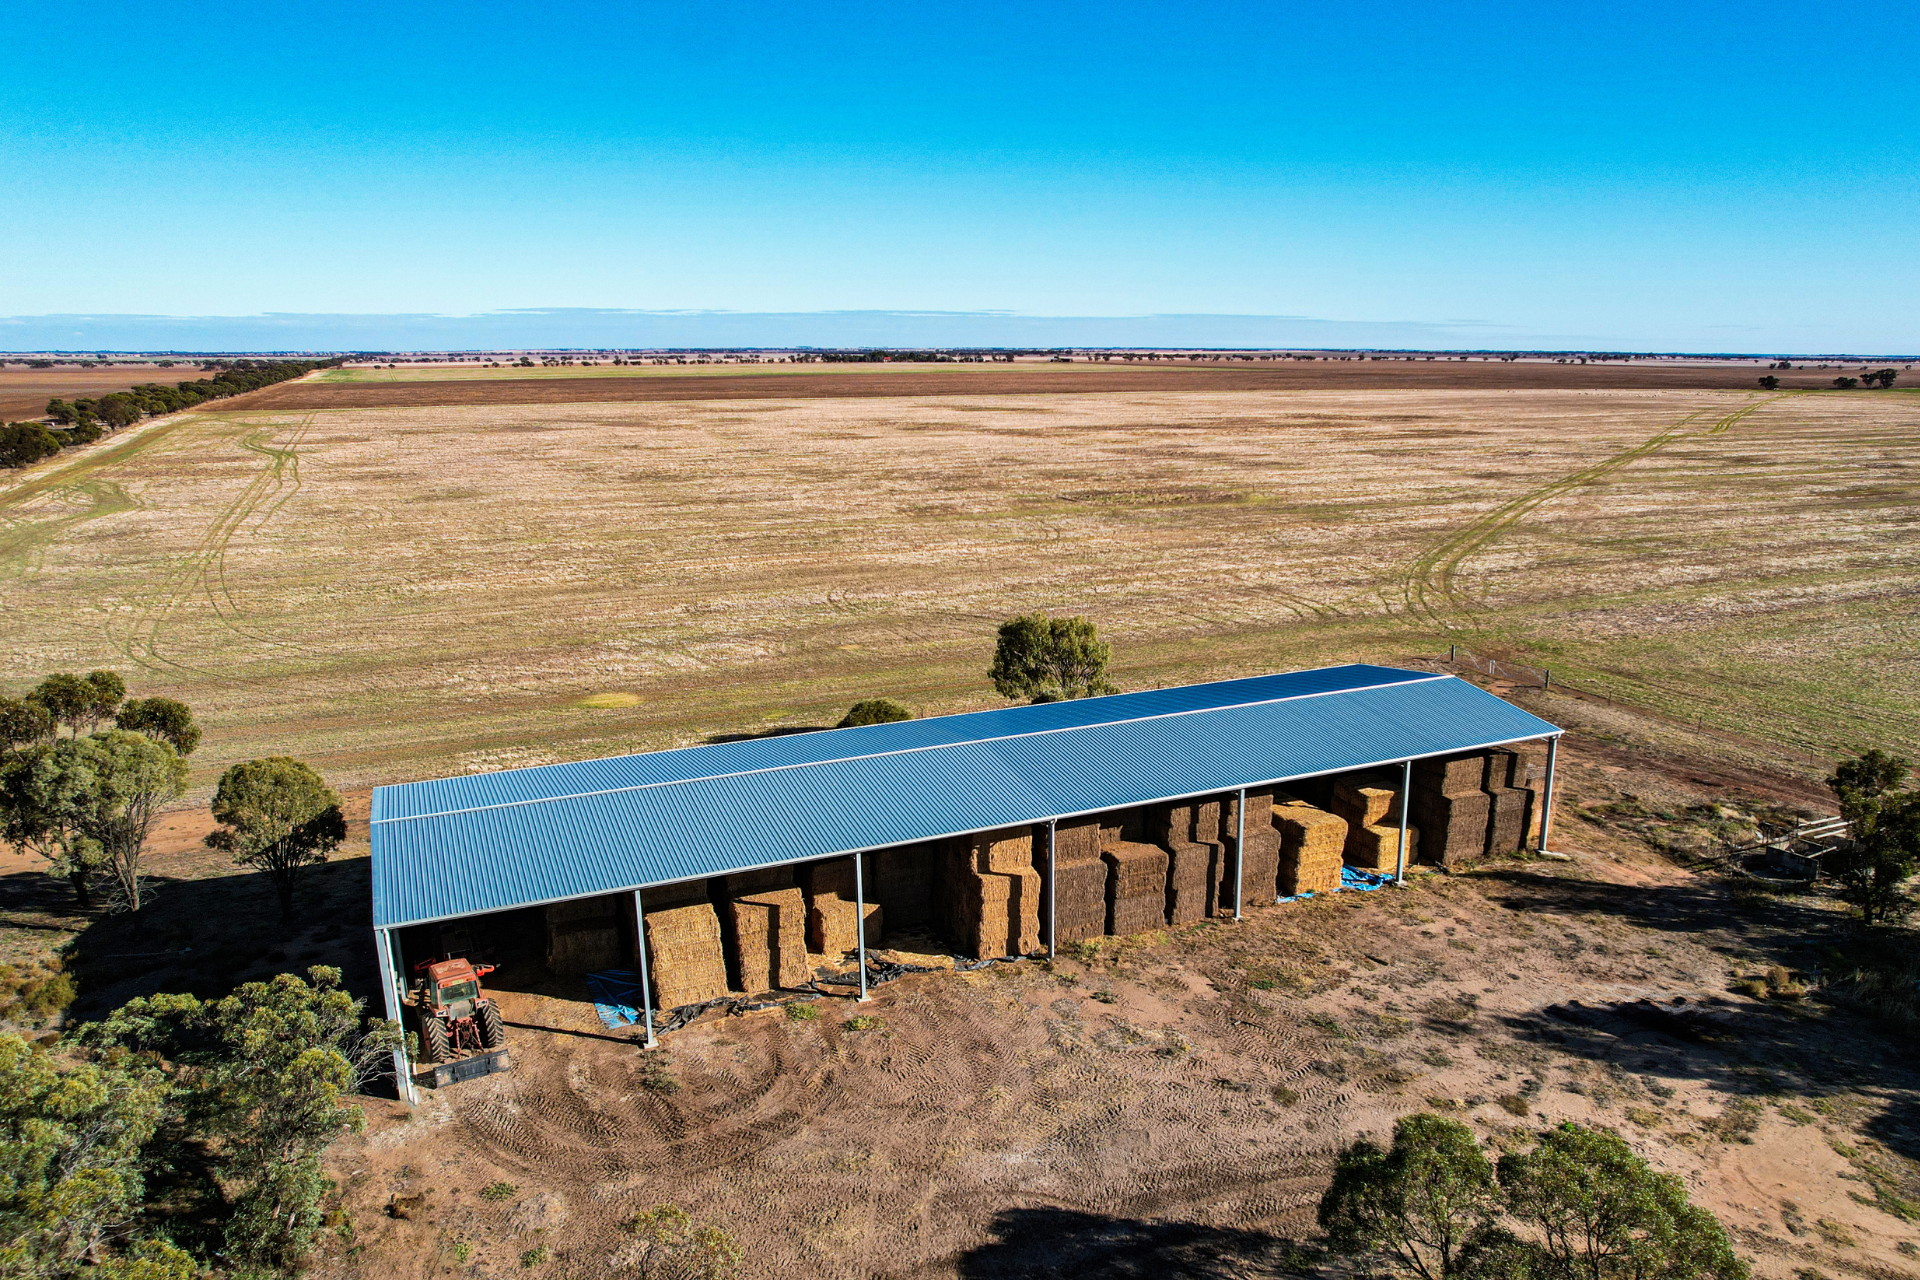 A 51m x 15m x 6m hay shed at Willenbrina VIC